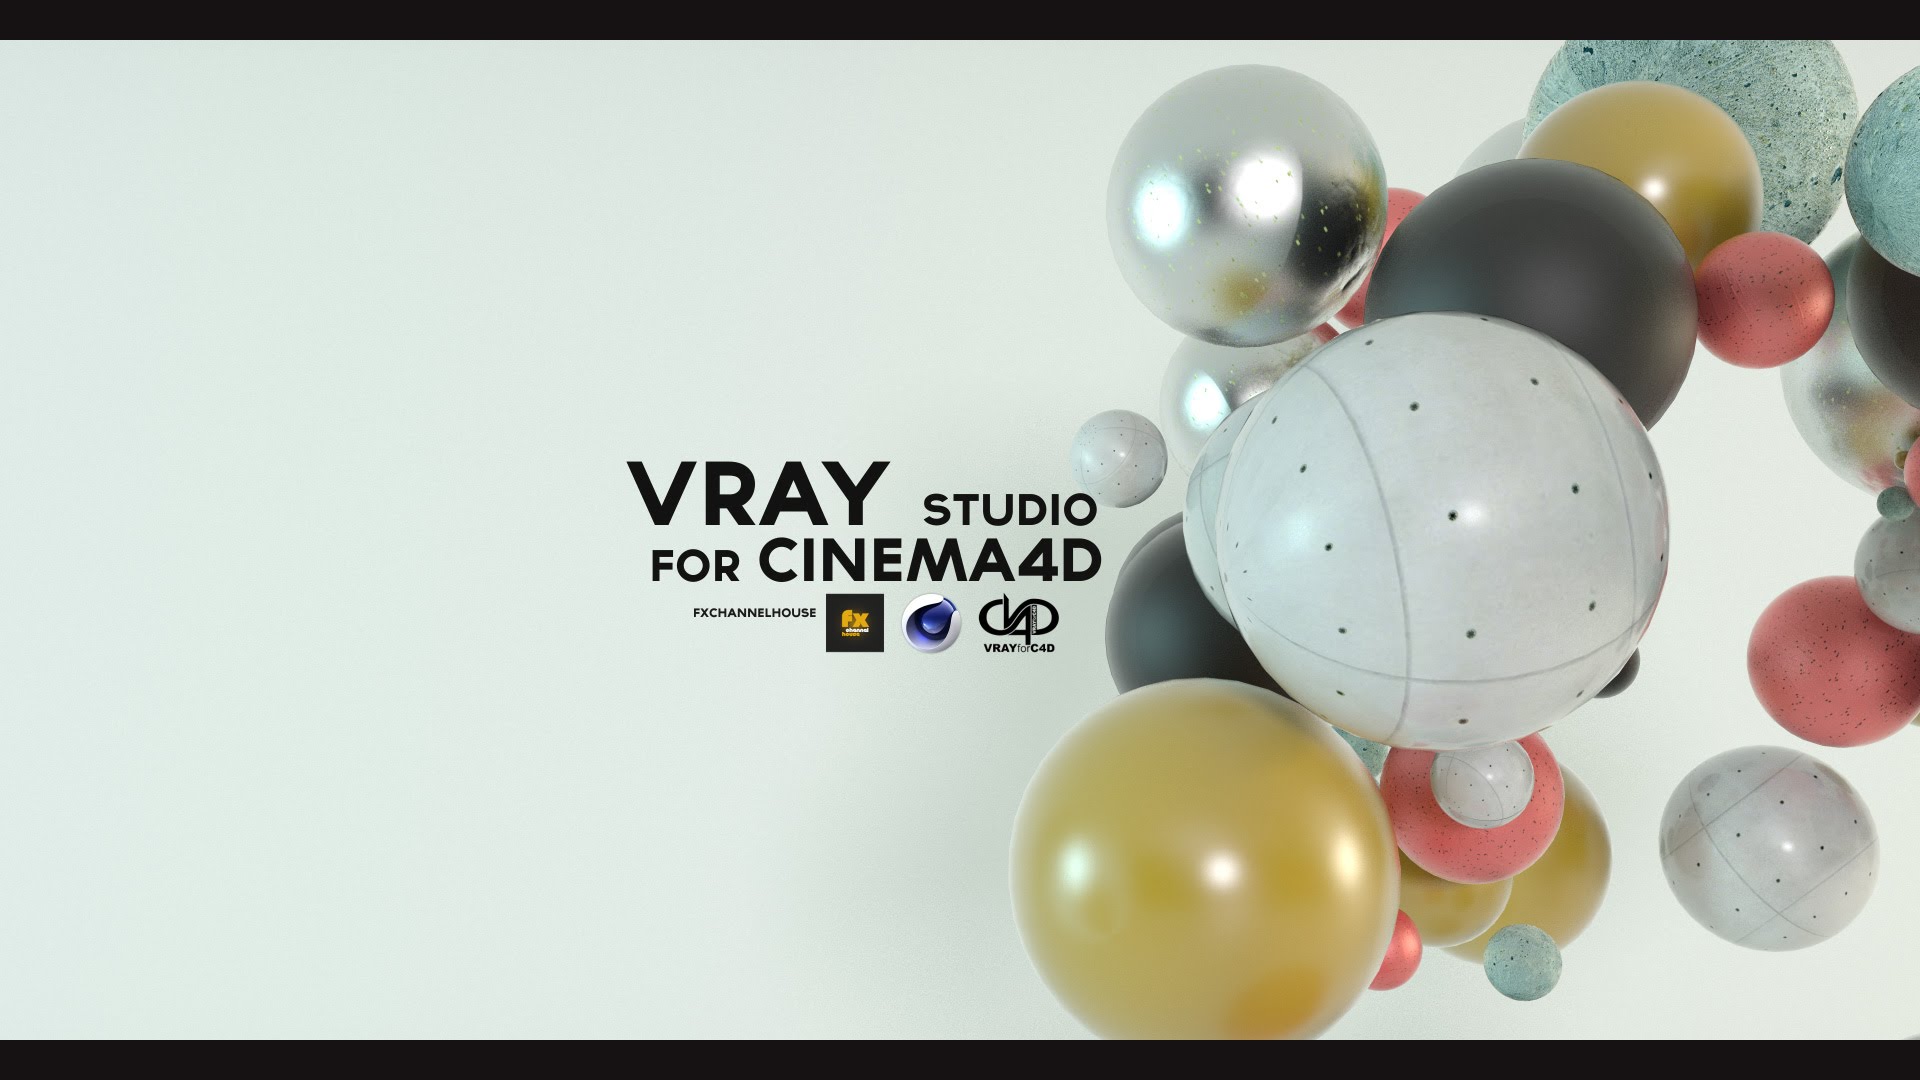 Vray for cinema 4d free trial